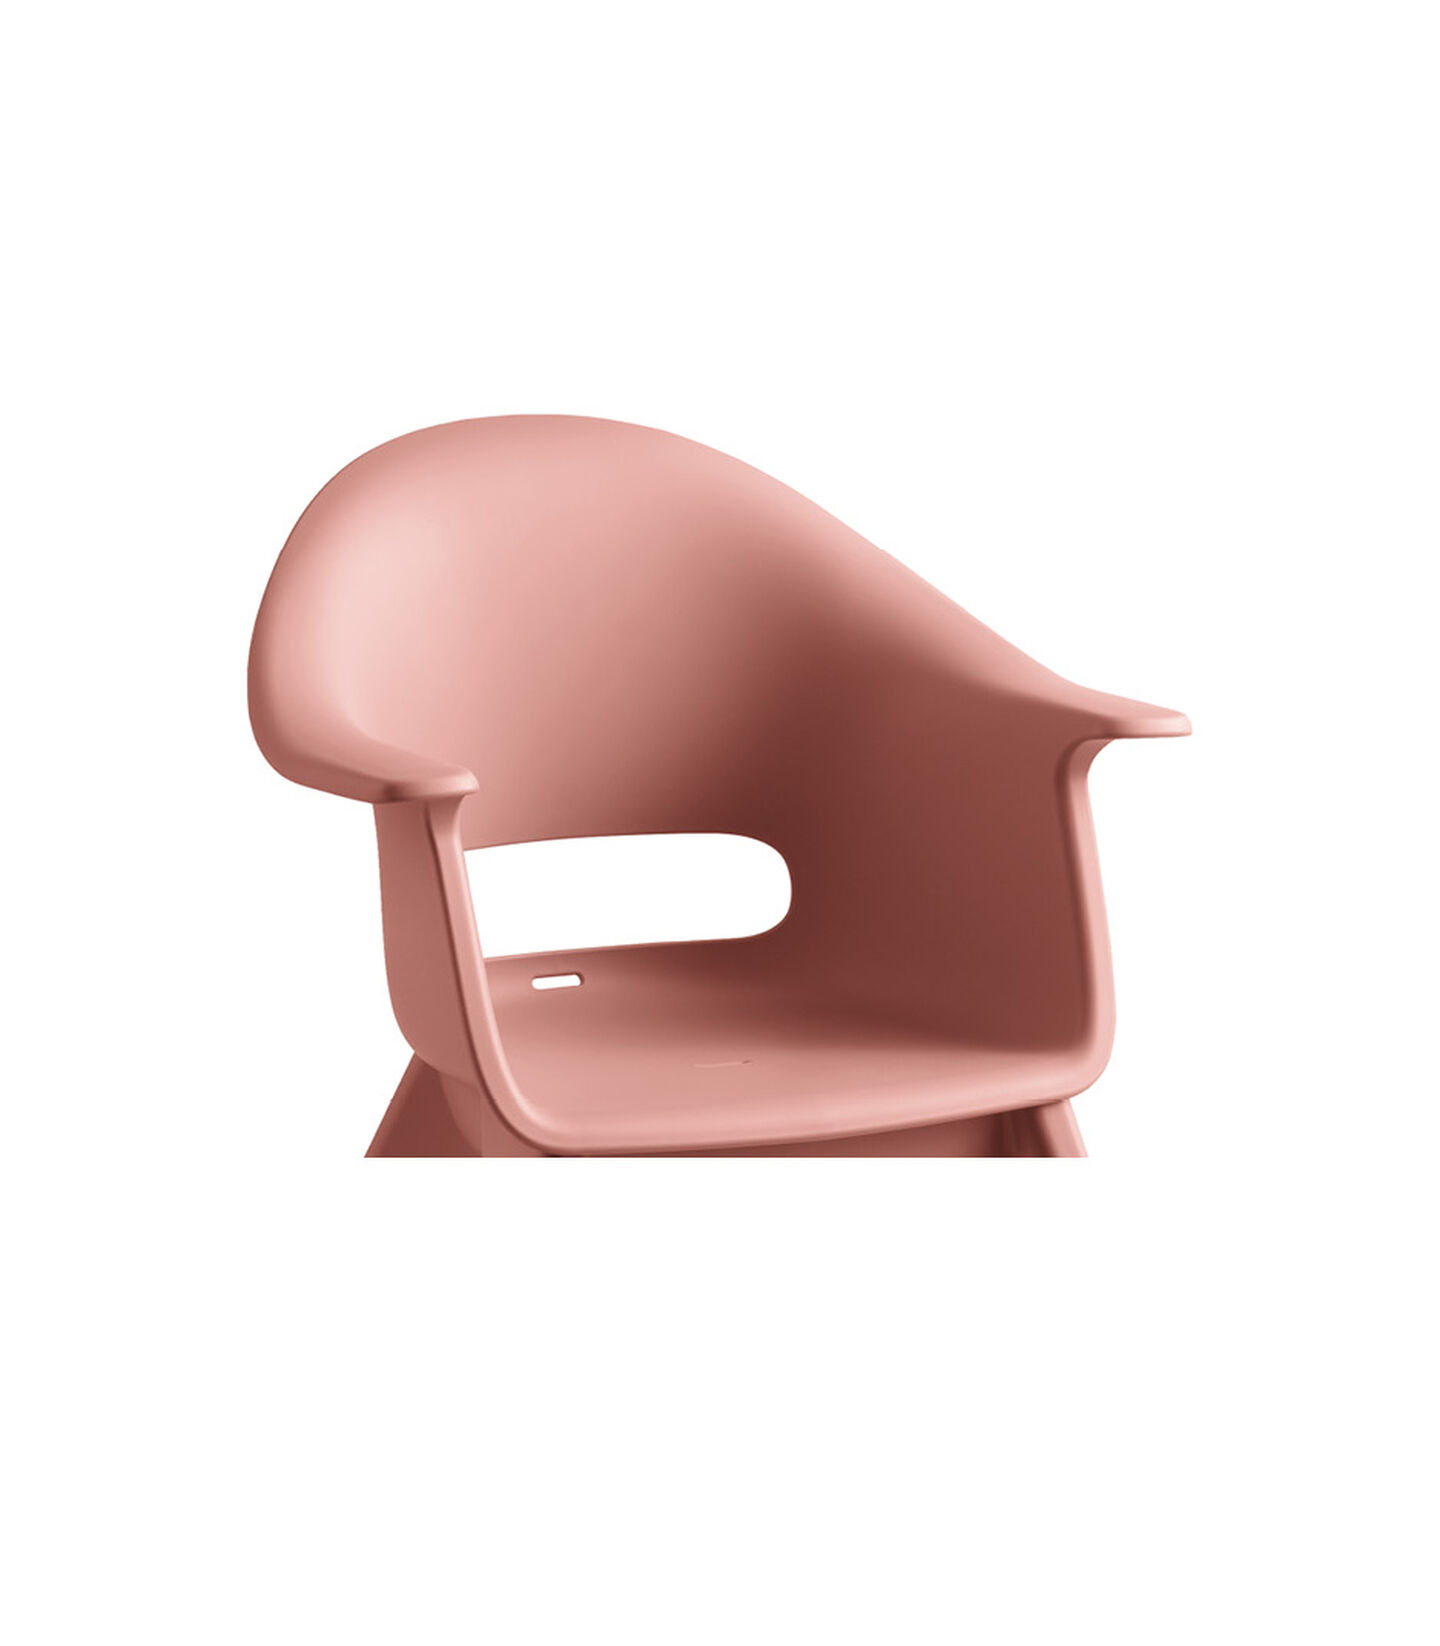 Сиденье Stokke® Clikk™, Sunny Coral, Sunny Coral, mainview view 1